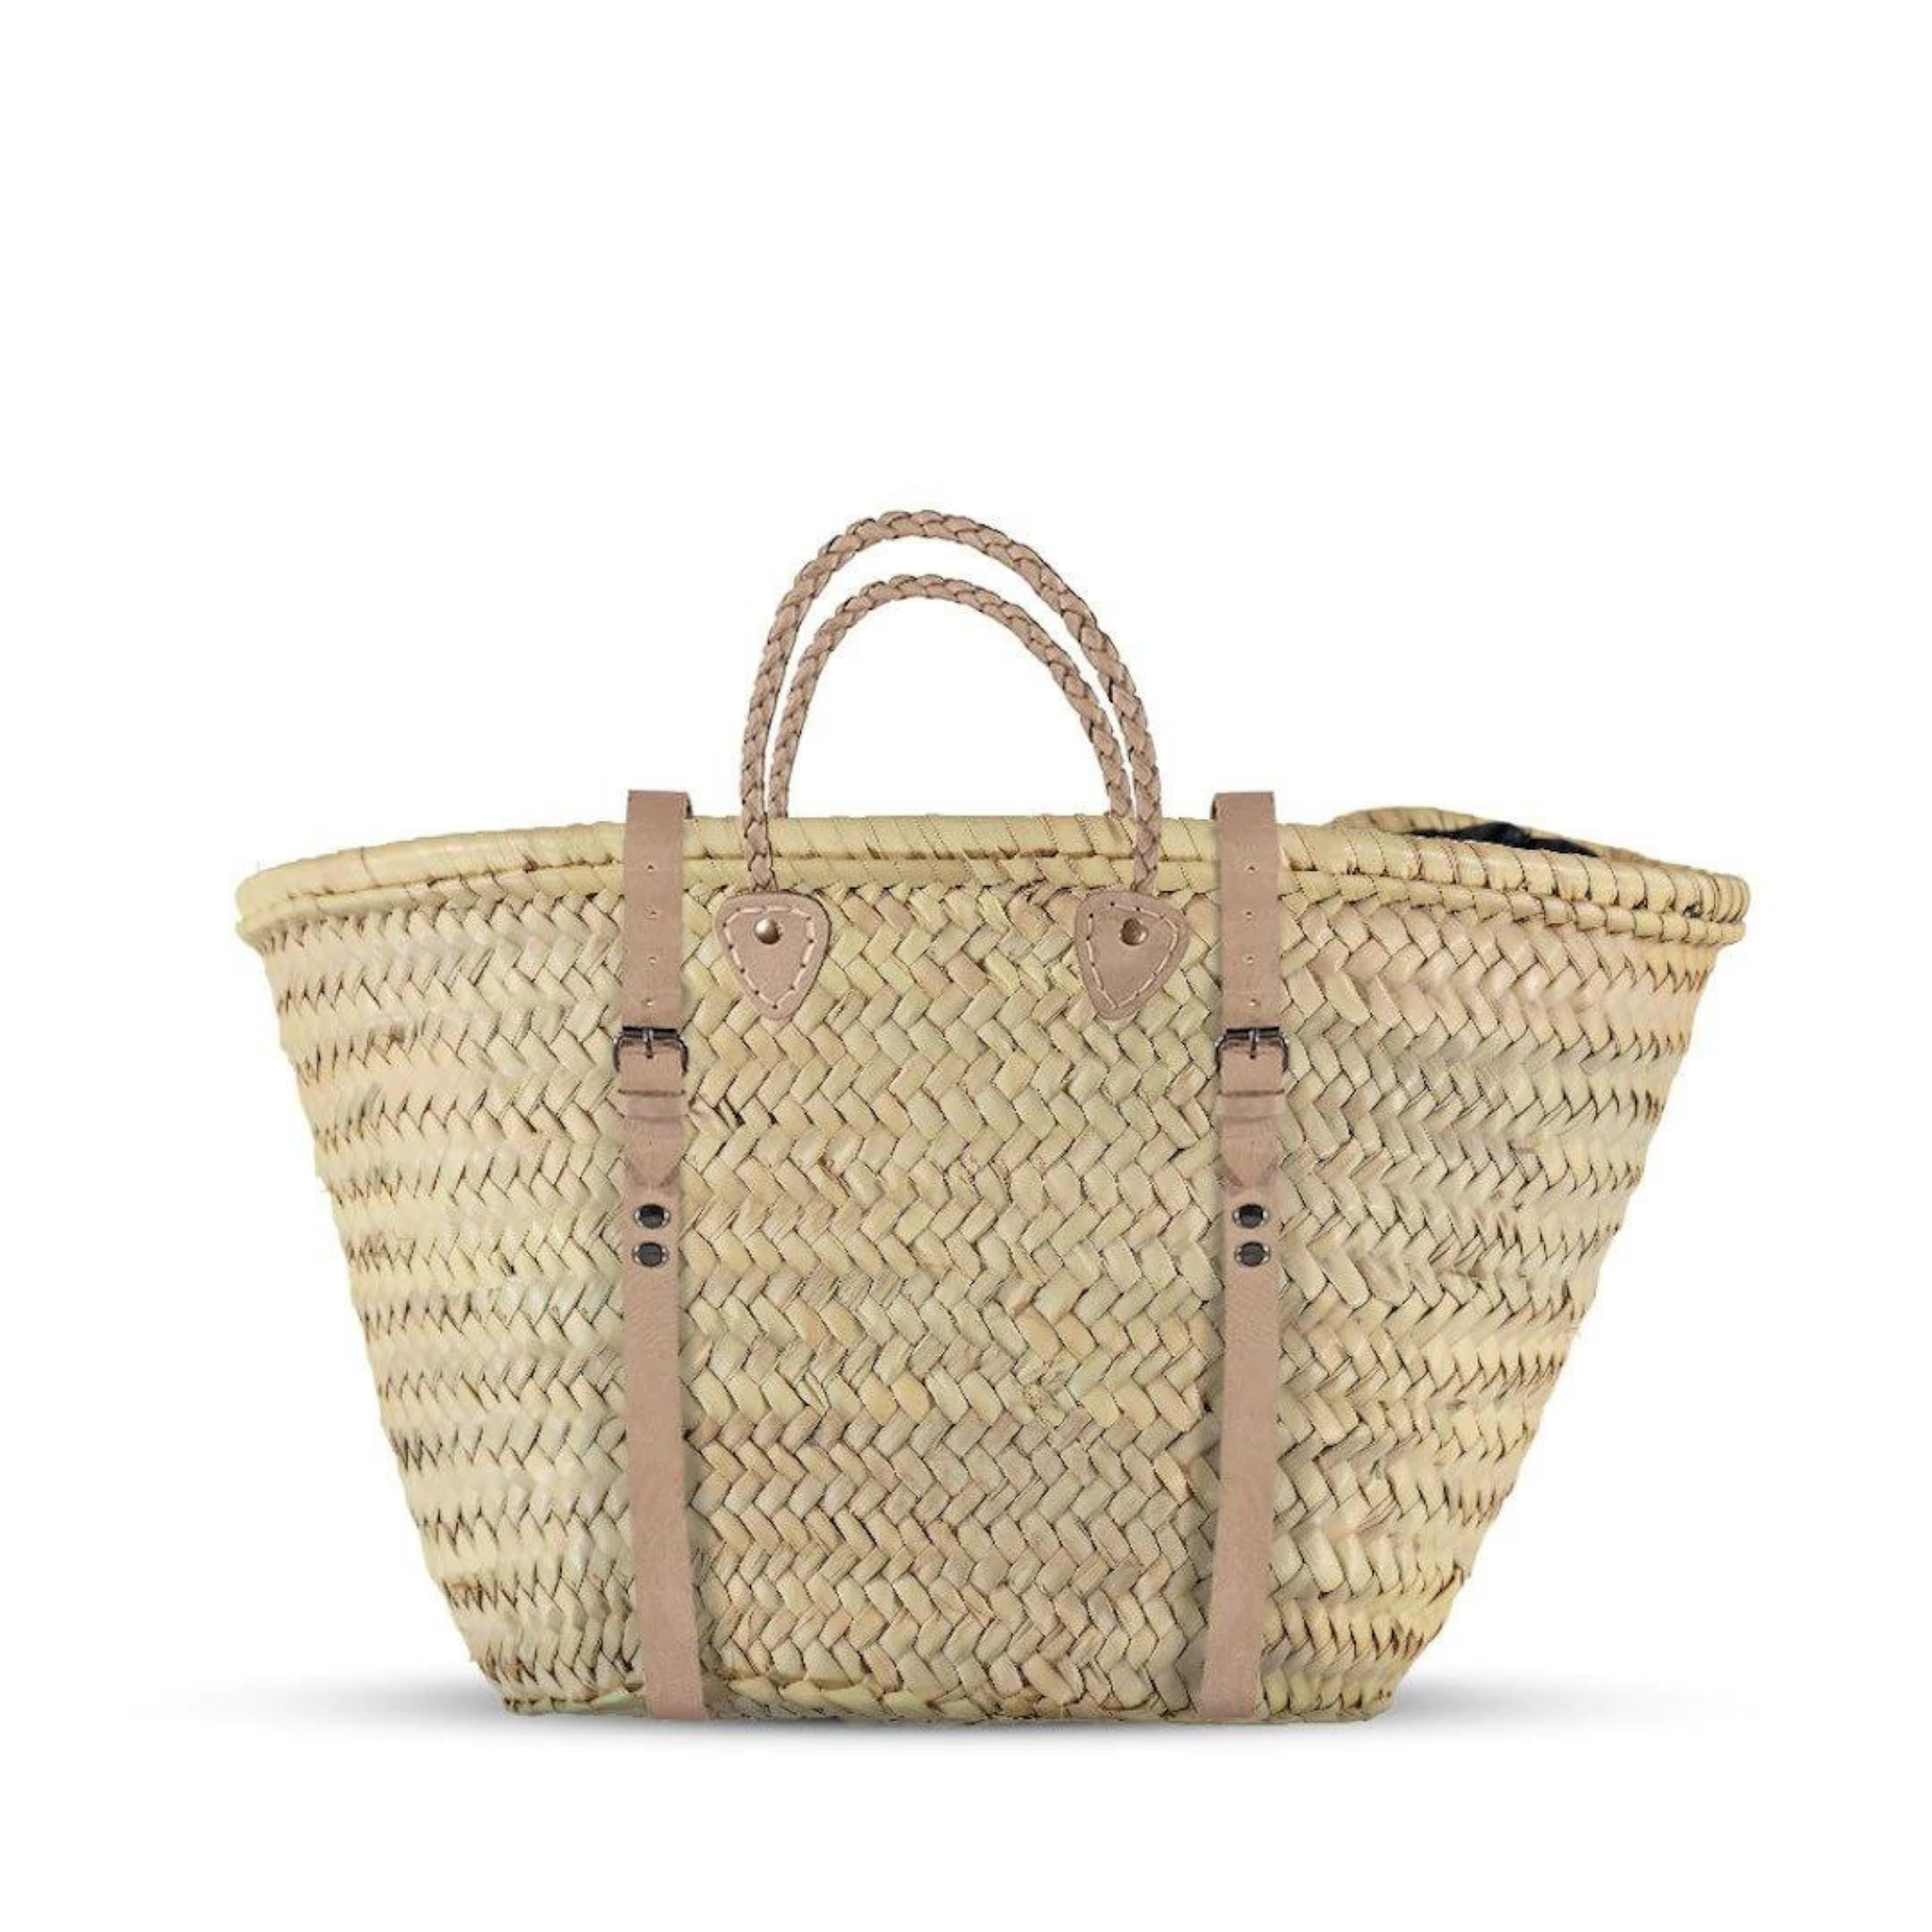 Cultiverre French Market Basket Backpack in natural woven palm leaves